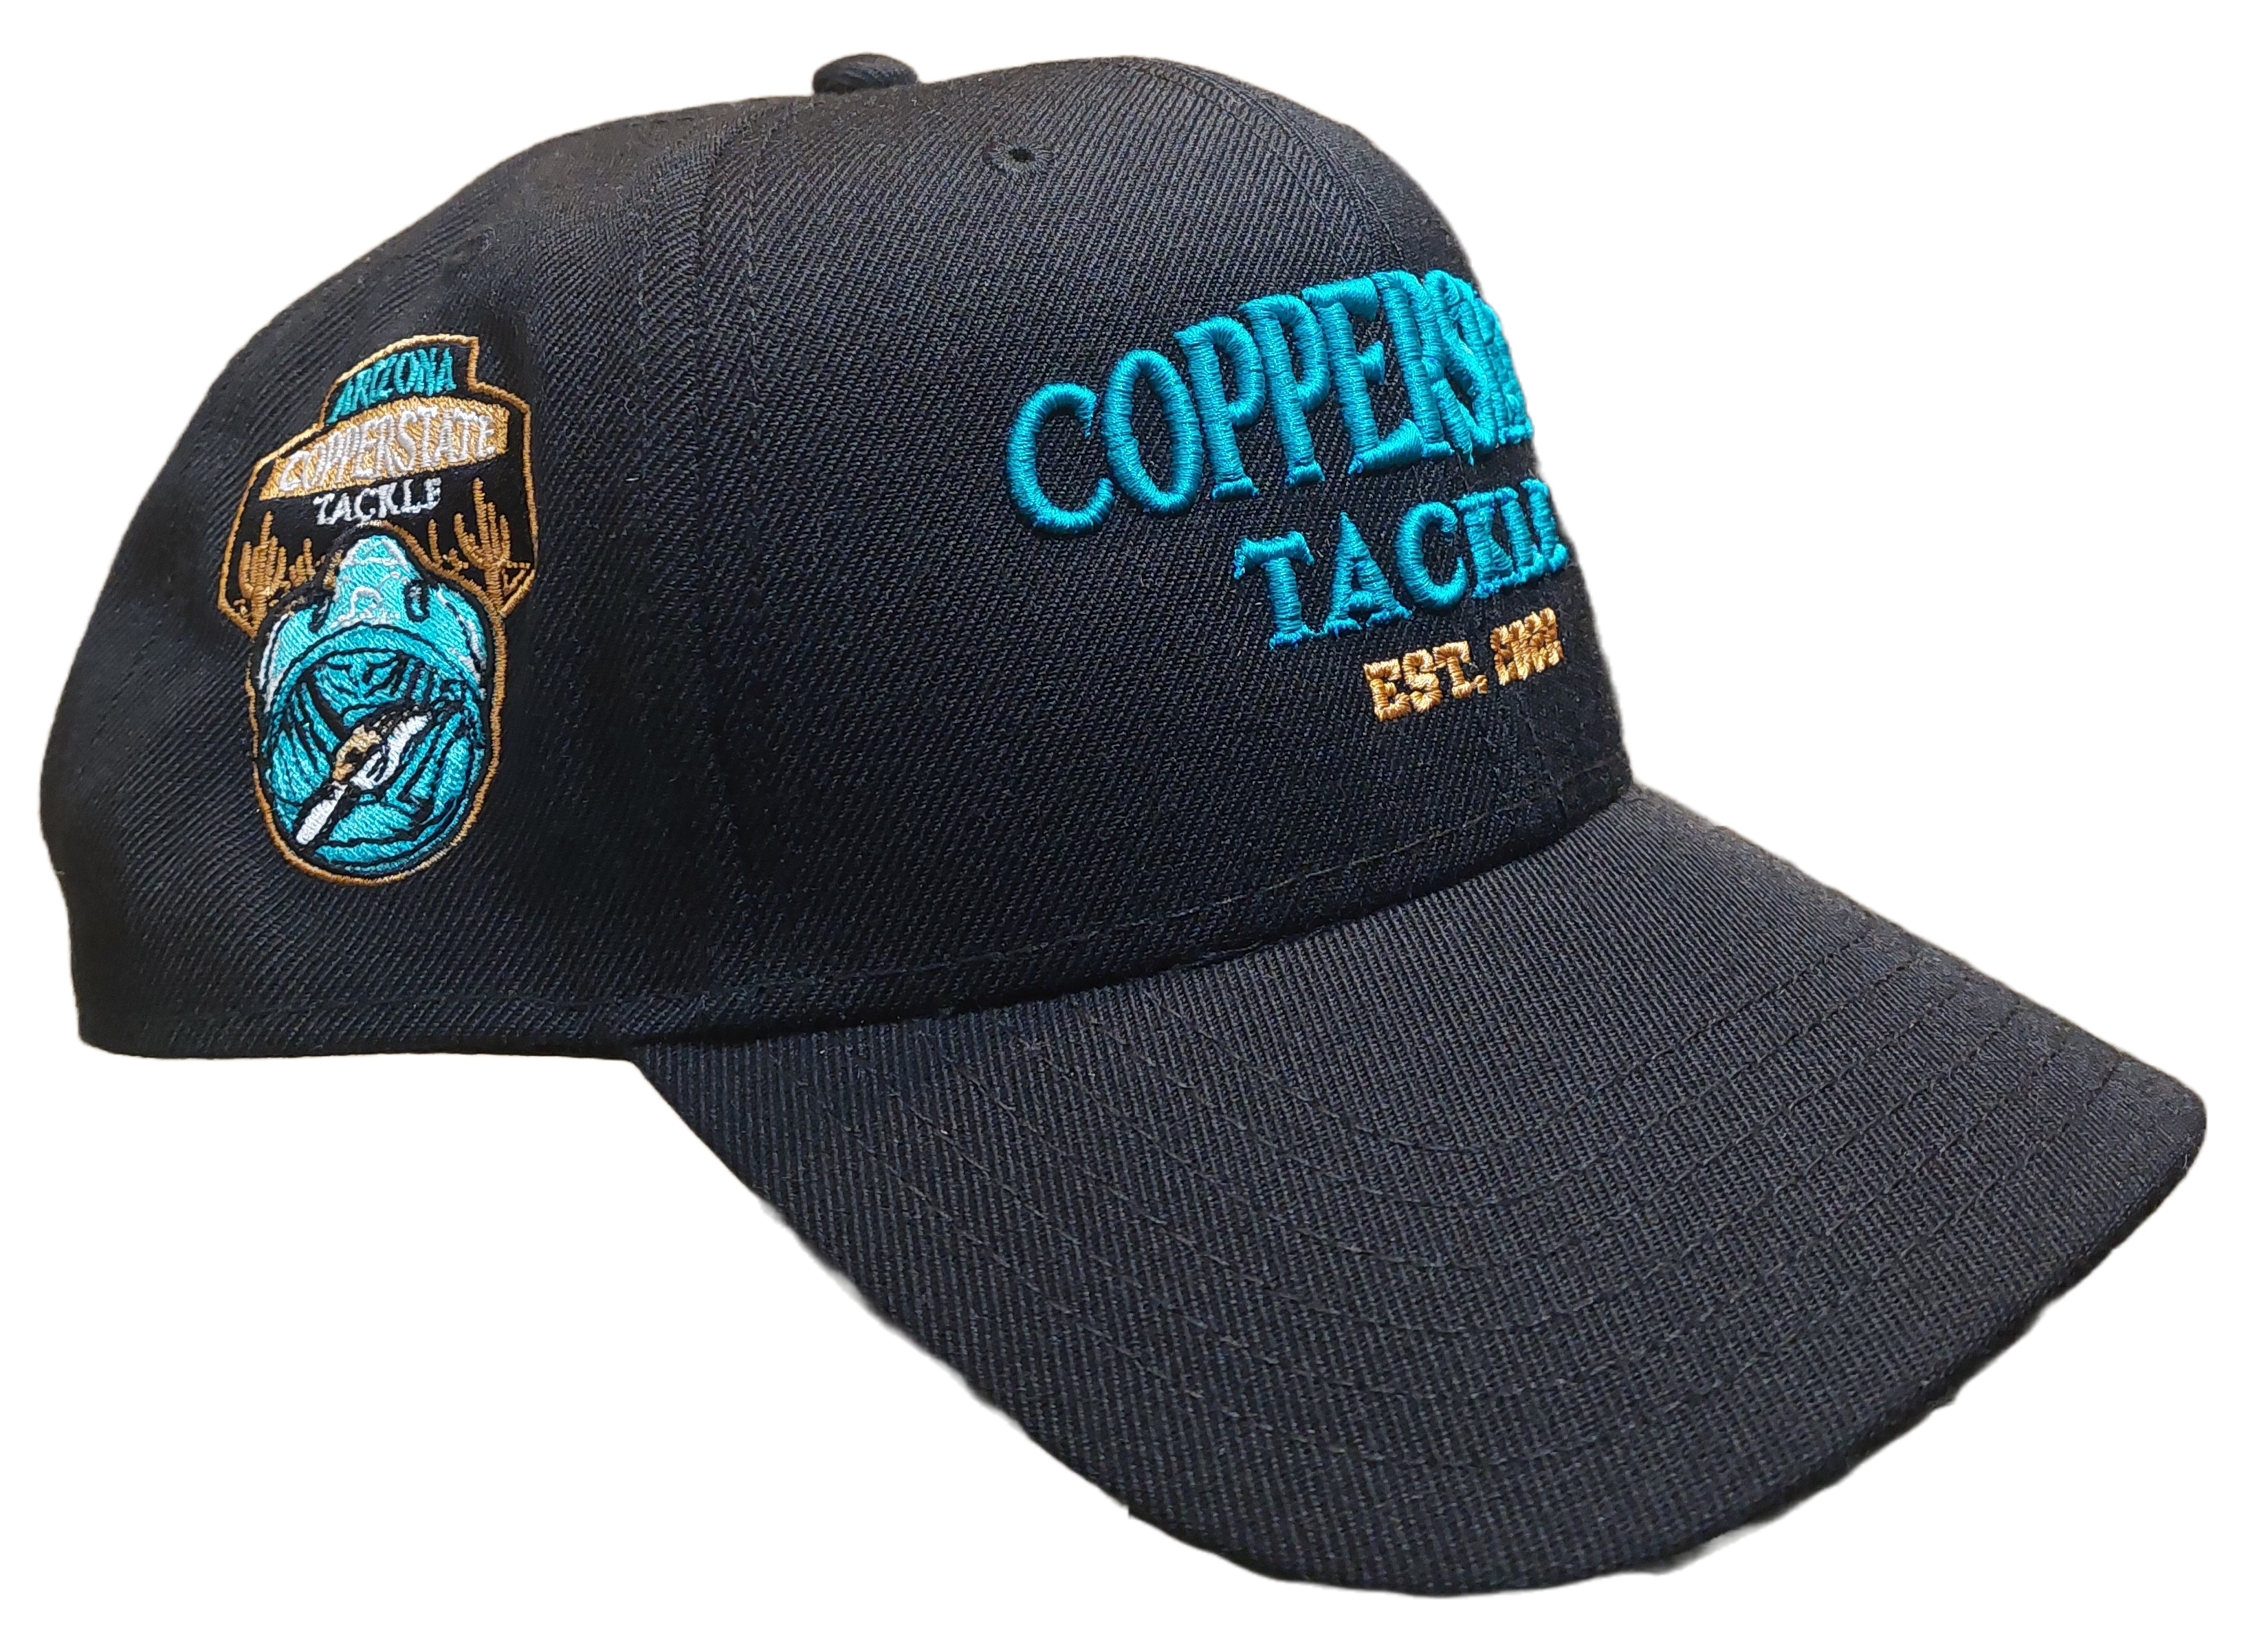 COPPERSTATE TACKLE ICAST ARIZONA EDITION HATS